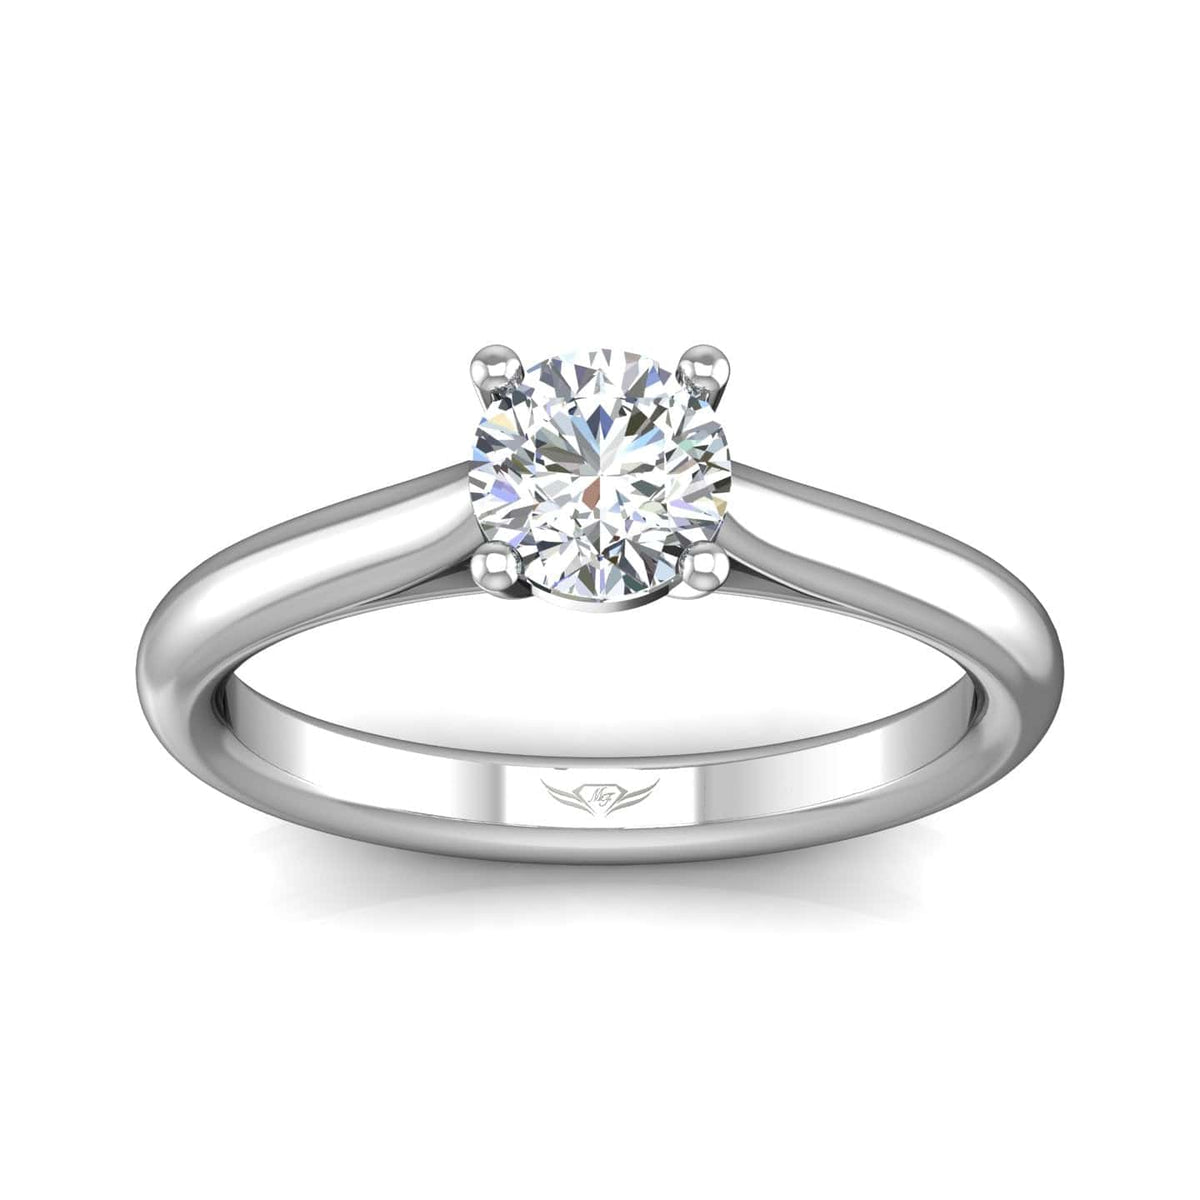 18K White Gold Solitaire Mounting with Round Diamond Engagement Ring